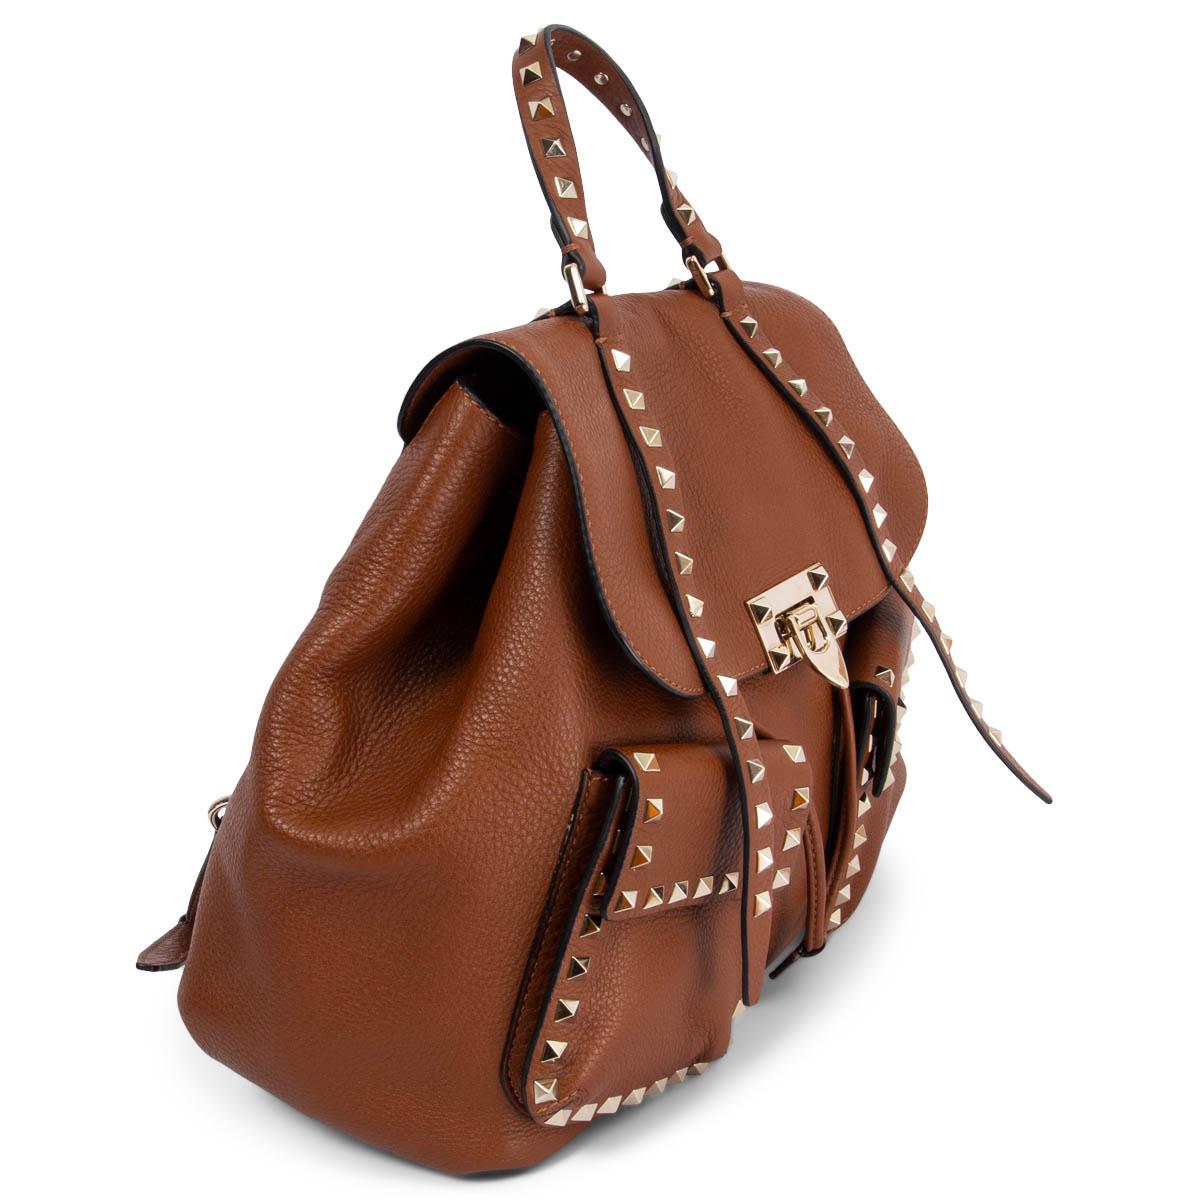 100% authentic Valentino Rockstud Double Pocket Backpack backpack in cognac pebbled calfskin with signature light gold-tone pyramid studs that line the borders of the bag. It features two frontal zipper pockets, adjustable shoulder straps and a top